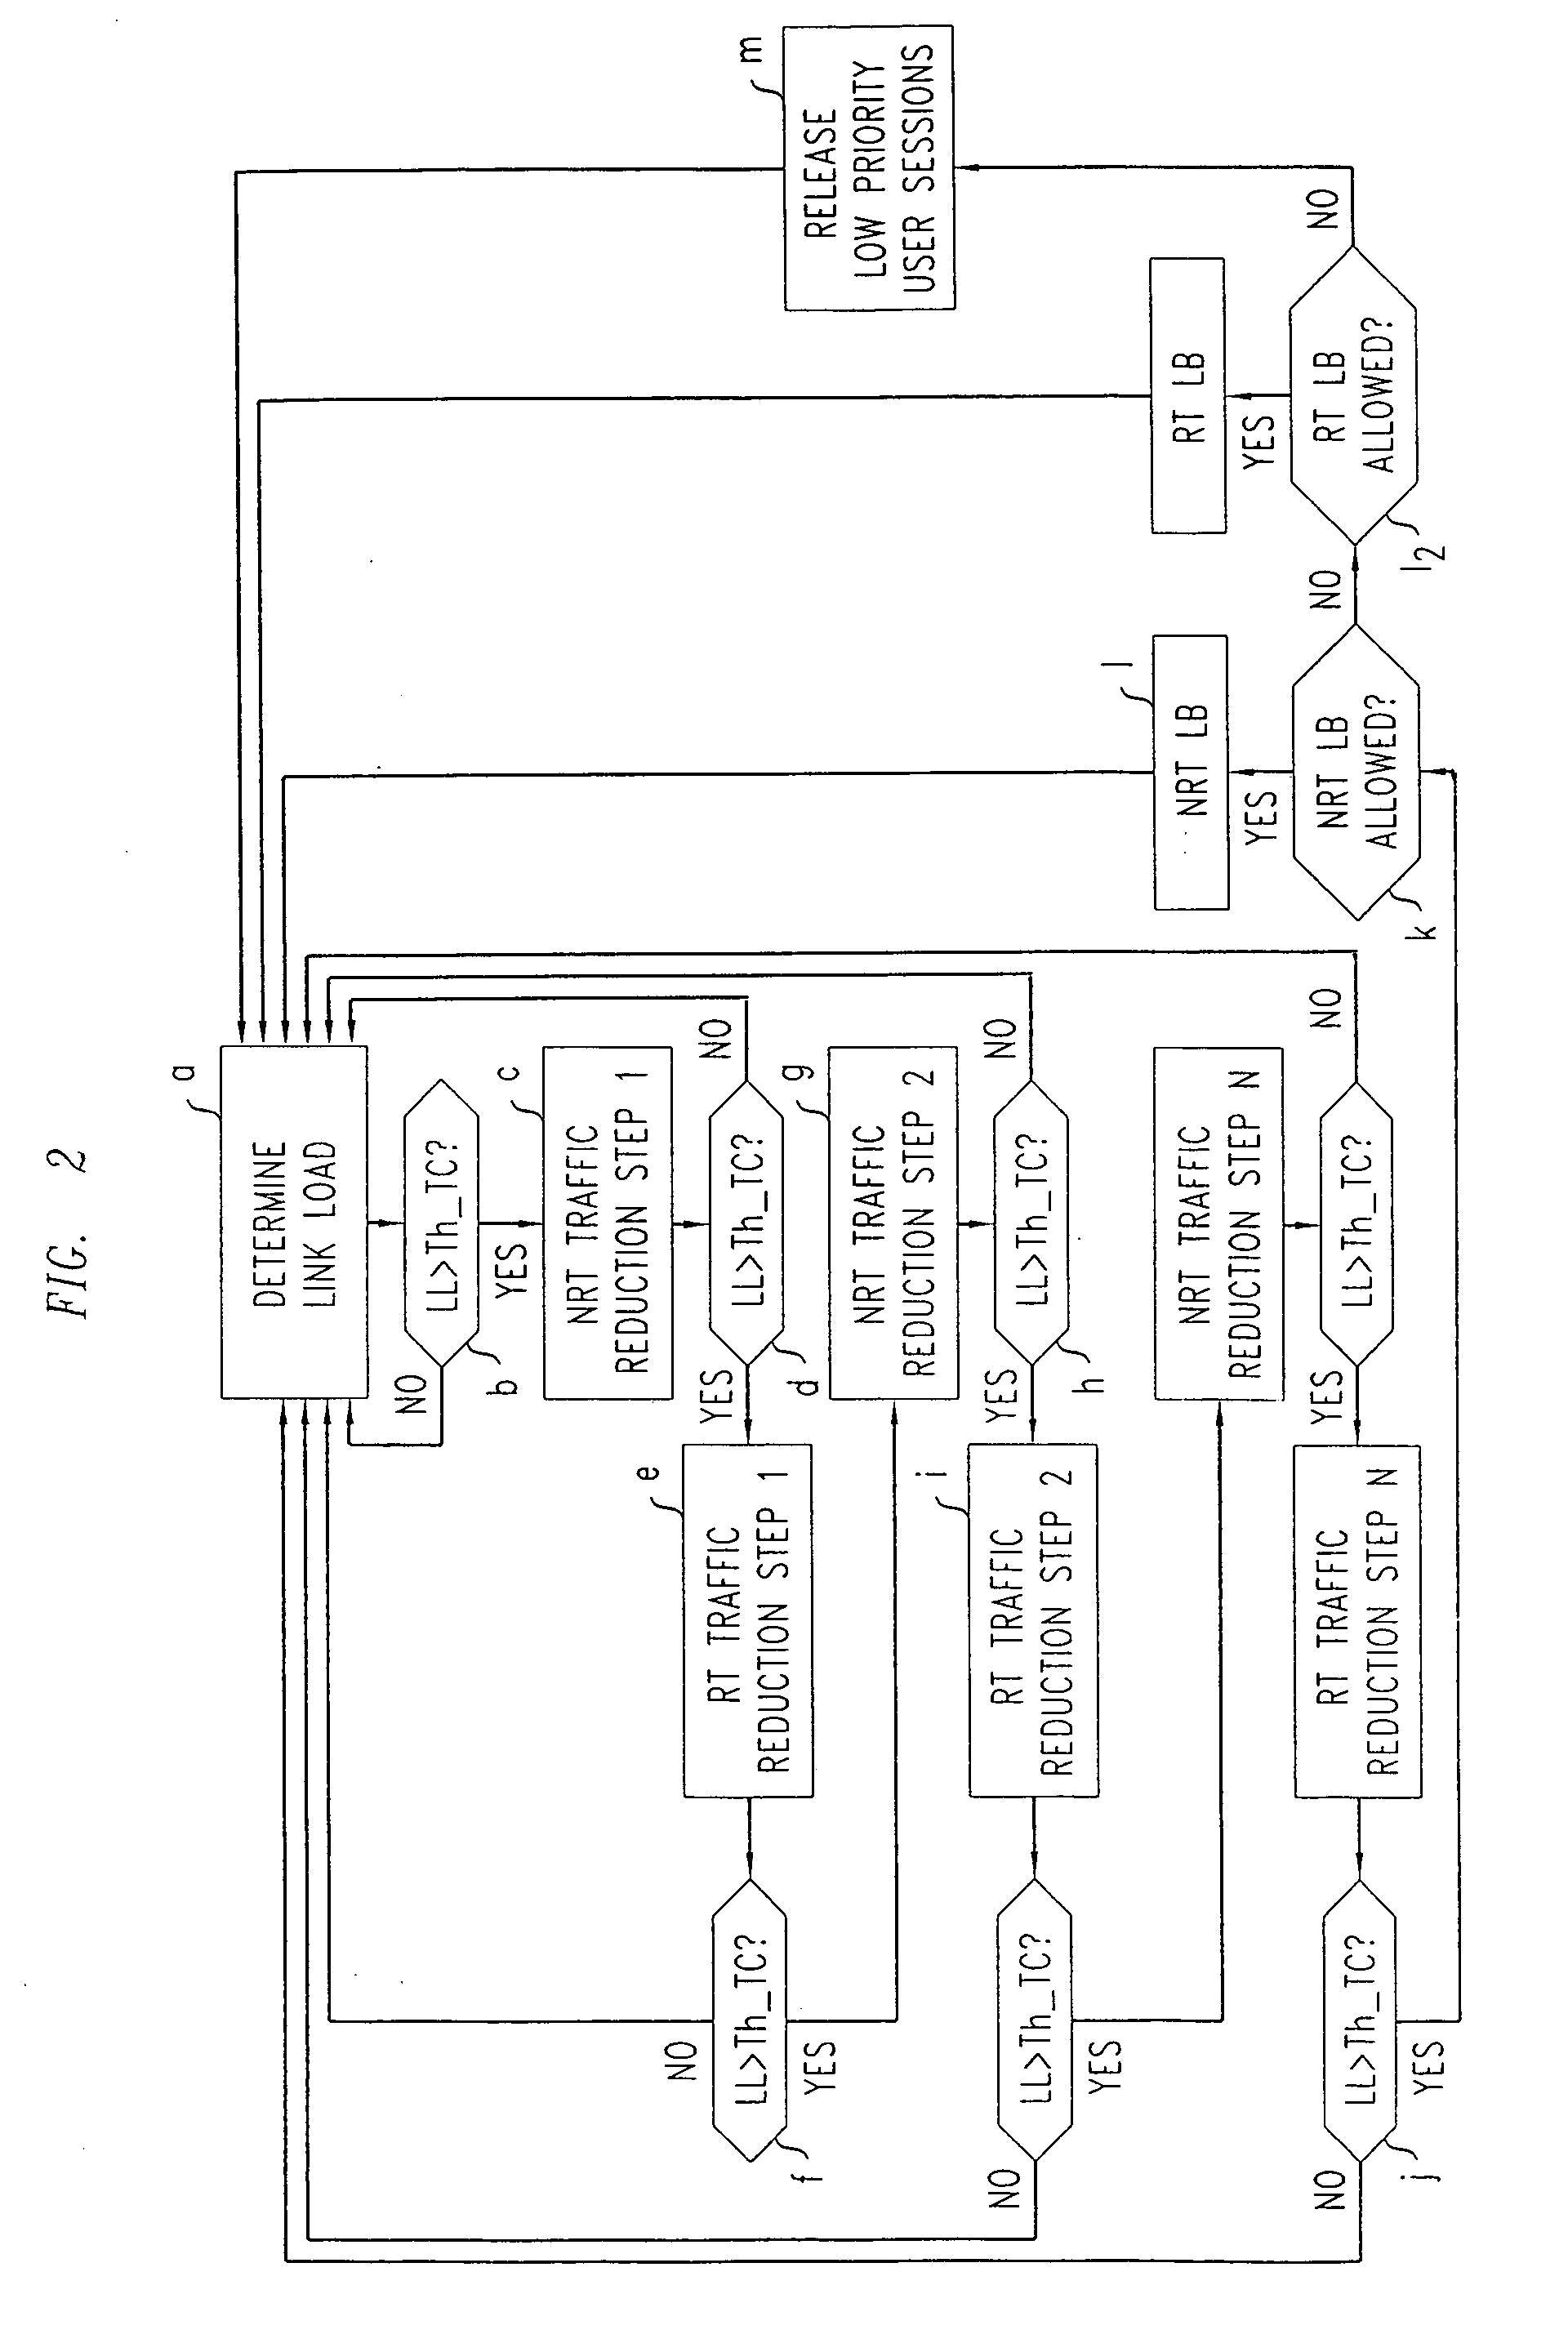 Traffic load control in a telecommunications network